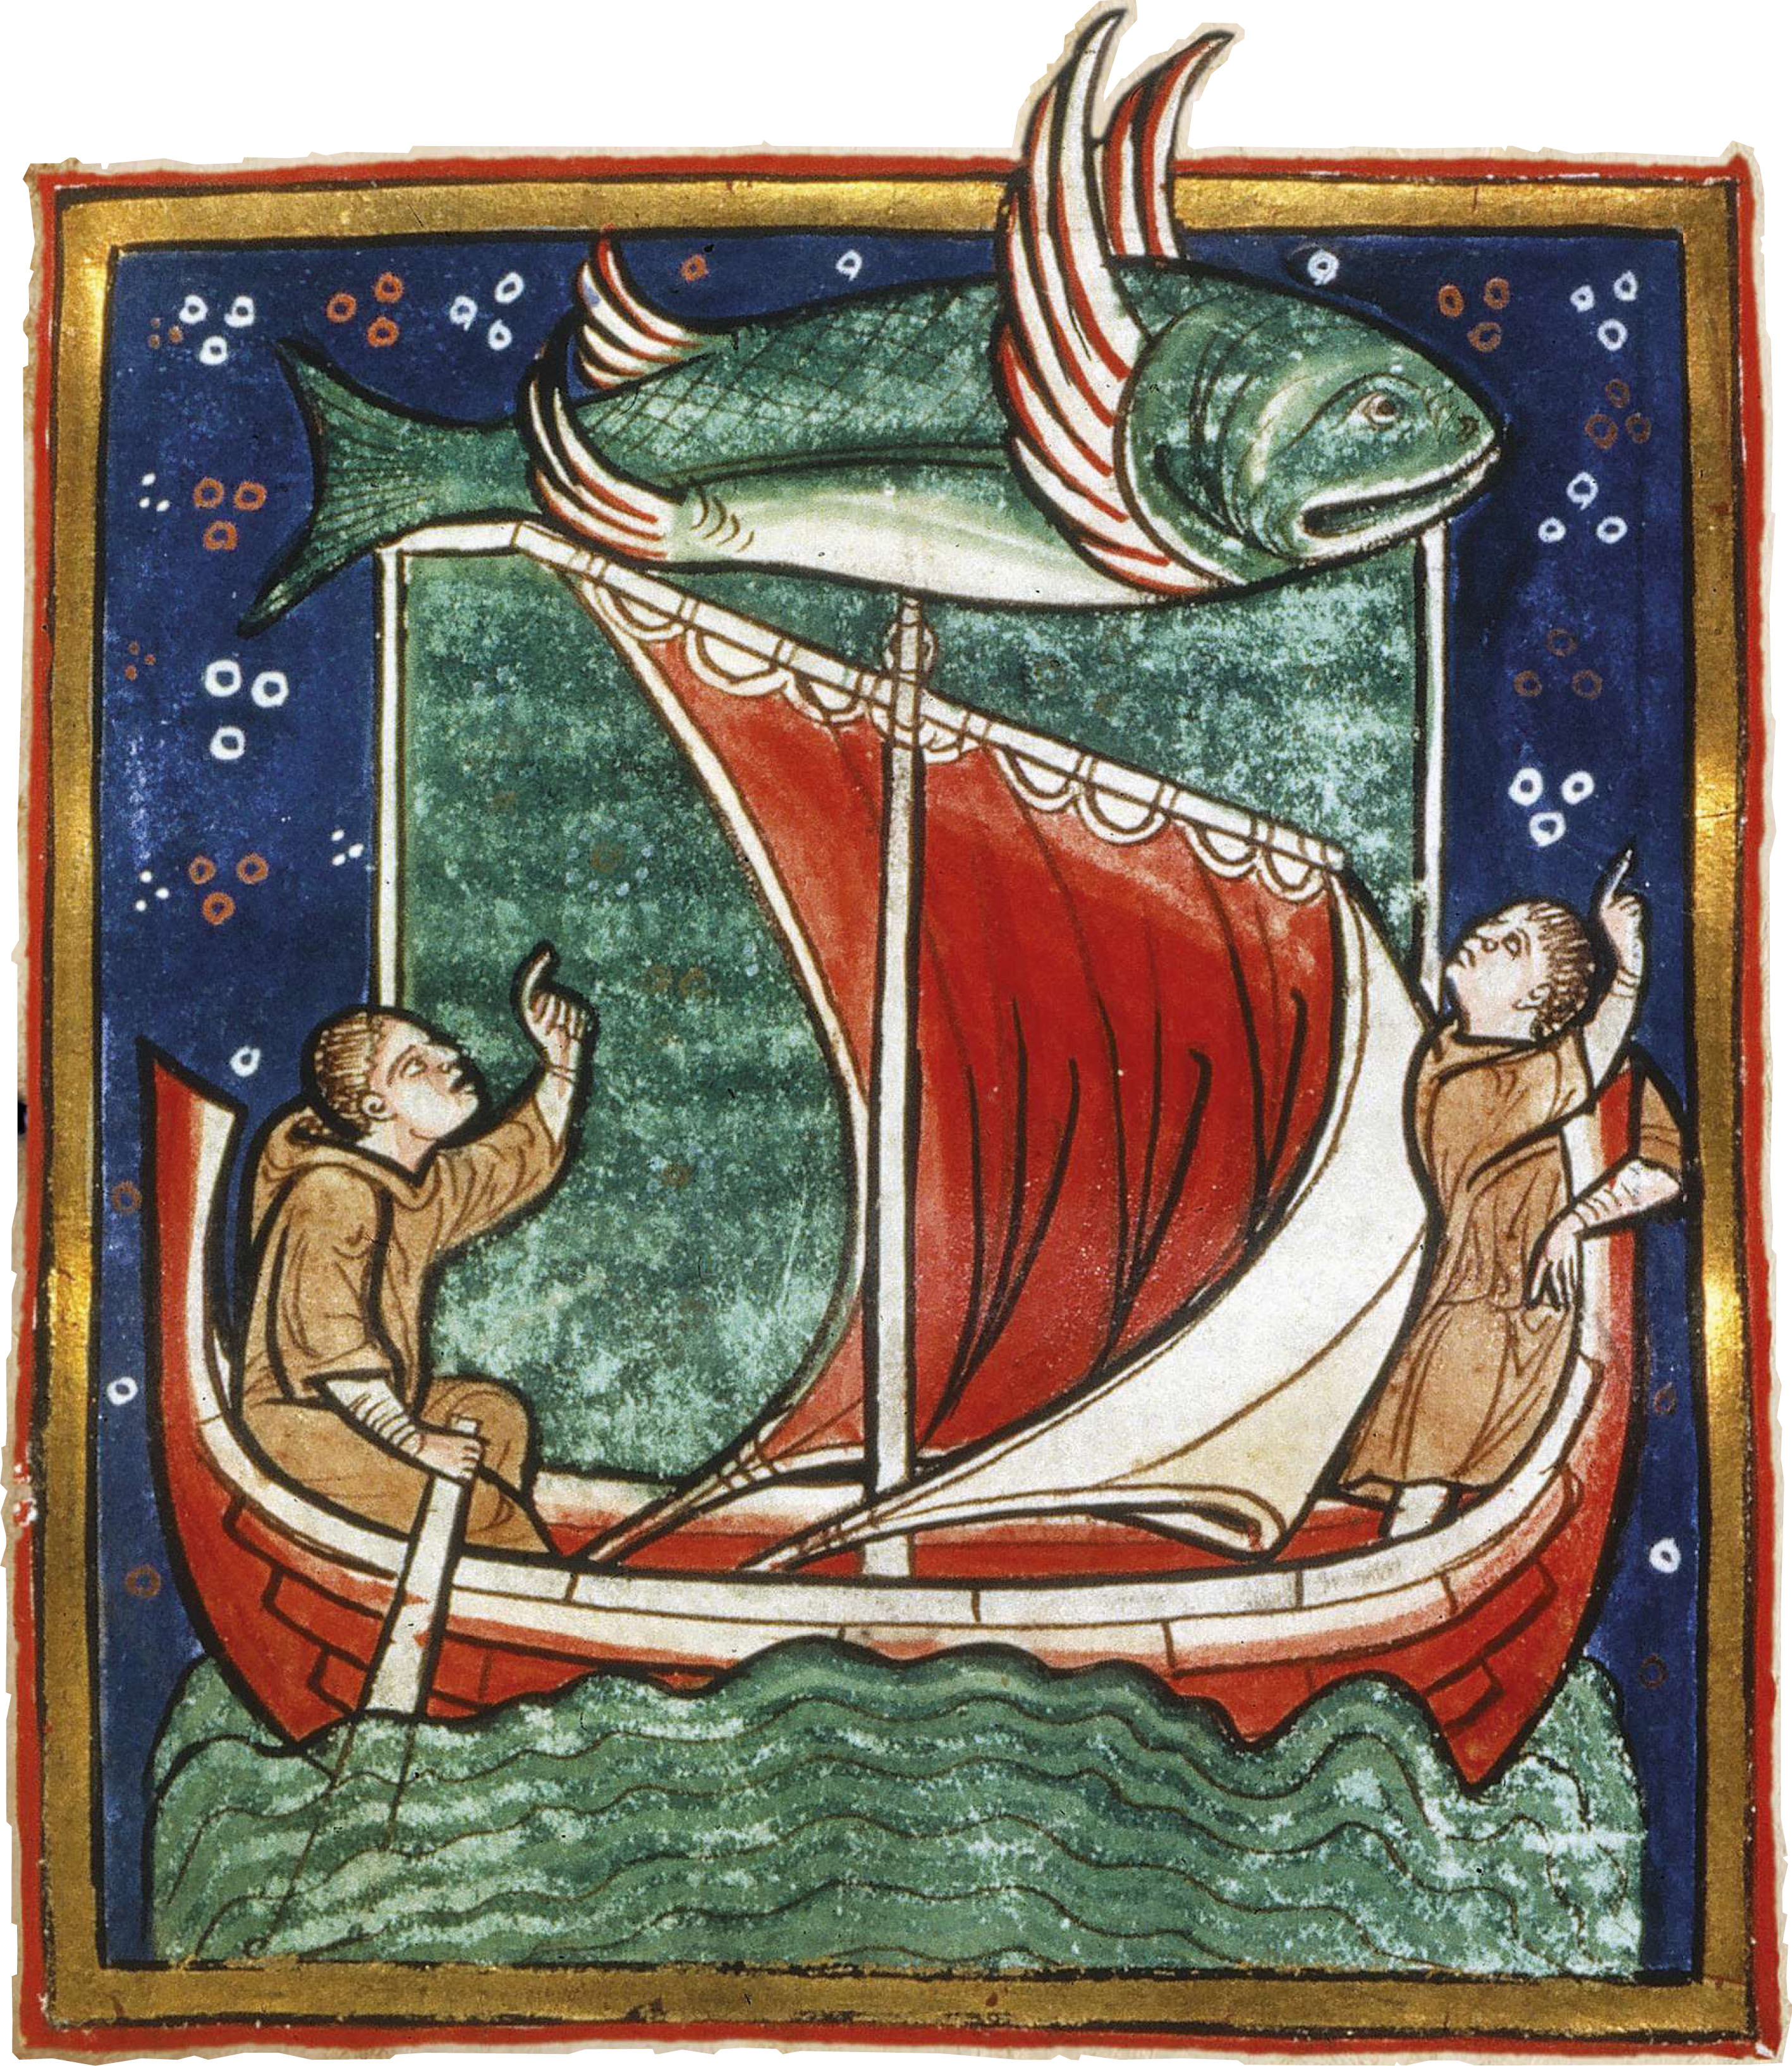 Two men in a boat pointing at a flying fish overhead.